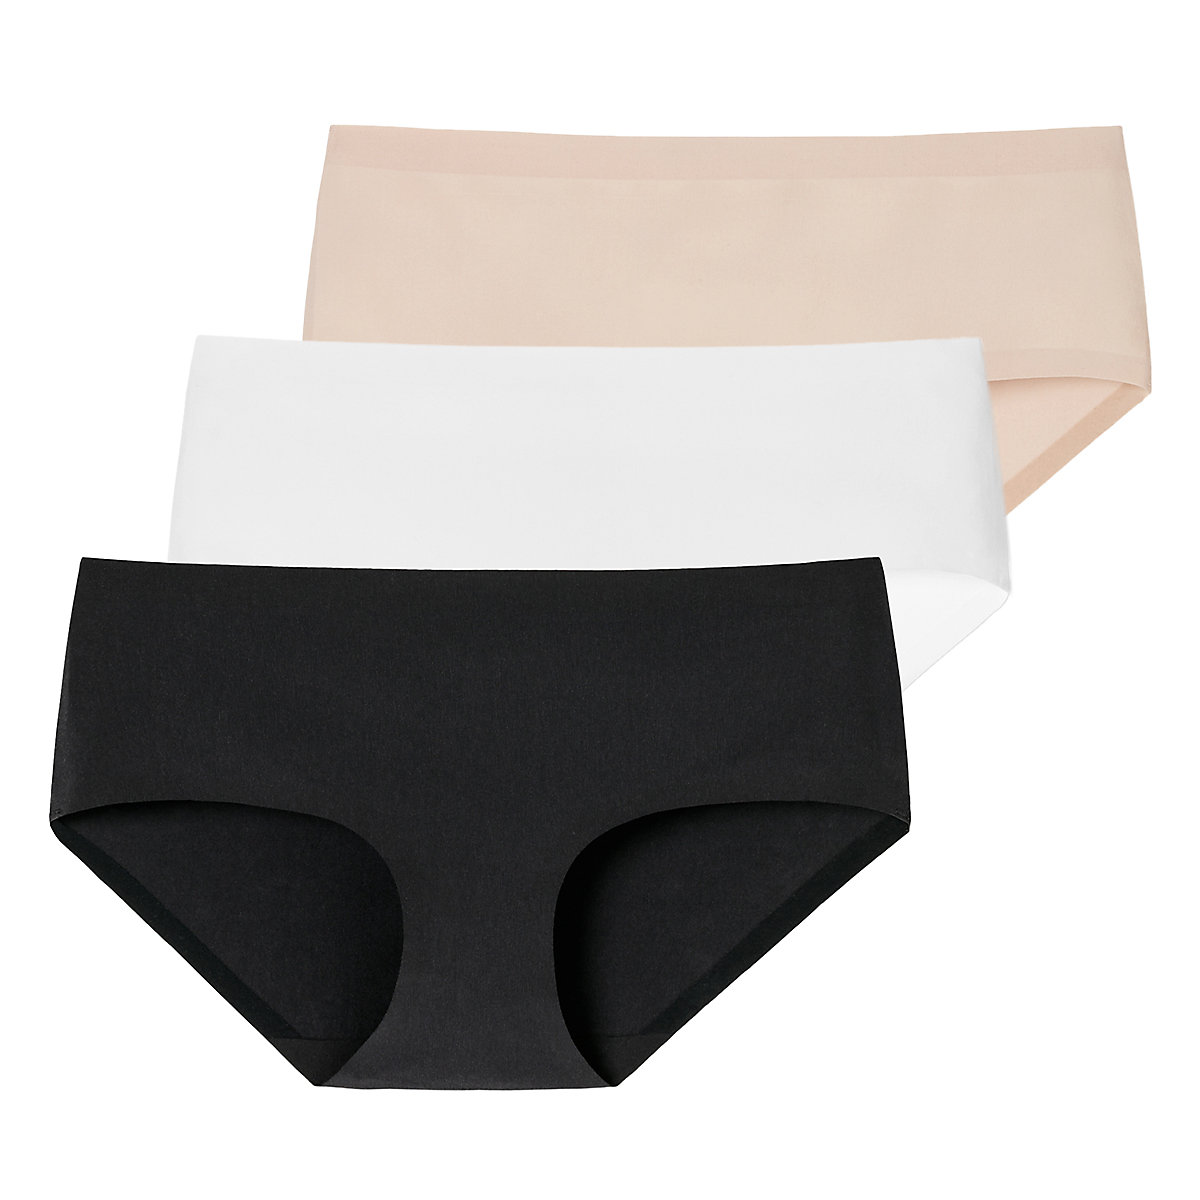 SCHIESSER nahtloser Panty 3er Pack Invisible Cotton Panties mehrfarbig